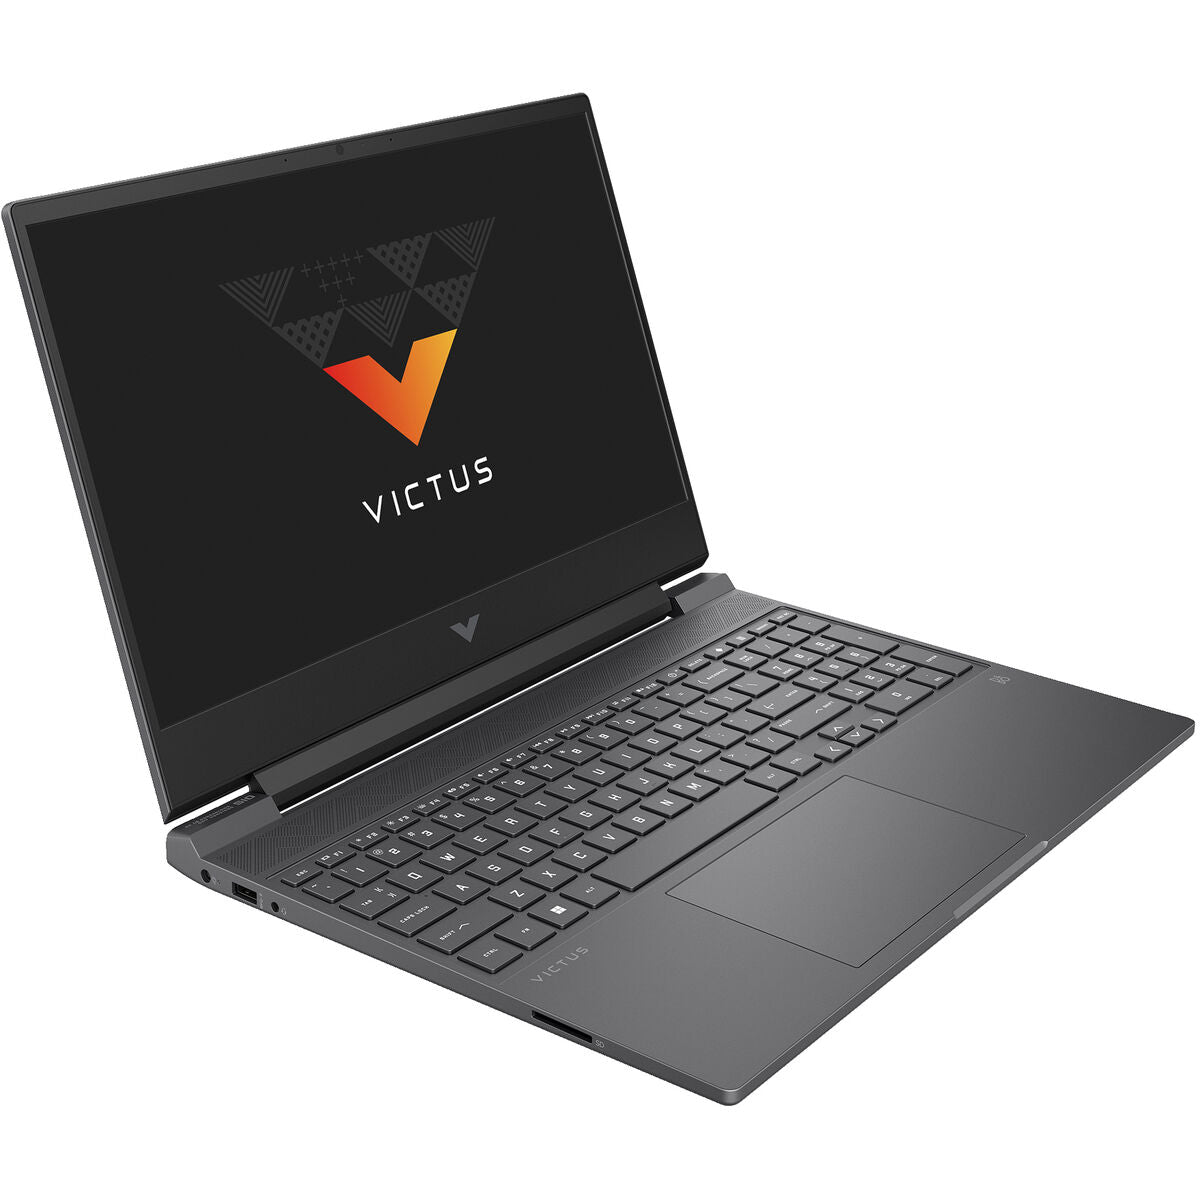 Laptop HP Victus Gaming Laptop 15-fa1002ns 15,6" Intel Core i7-13700H 16 GB RAM 512 GB SSD Nvidia Geforce RTX 4050 Spanish Qwert, HP, Computing, notebook-hp-victus-gaming-laptop-15-fa1002ns-spanish-qwerty-intel-core-i7-13700h-512-gb-ssd-16-gb-ram, :2-in-1, :512 GB, :Gaming Laptop, :Intel-i7, :QWERTY, :RAM 16 GB, :Touchscreen, Brand_HP, category-reference-2609, category-reference-2791, category-reference-2797, category-reference-t-19685, Condition_NEW, office, Price_+ 1000, Teleworking, RiotNook